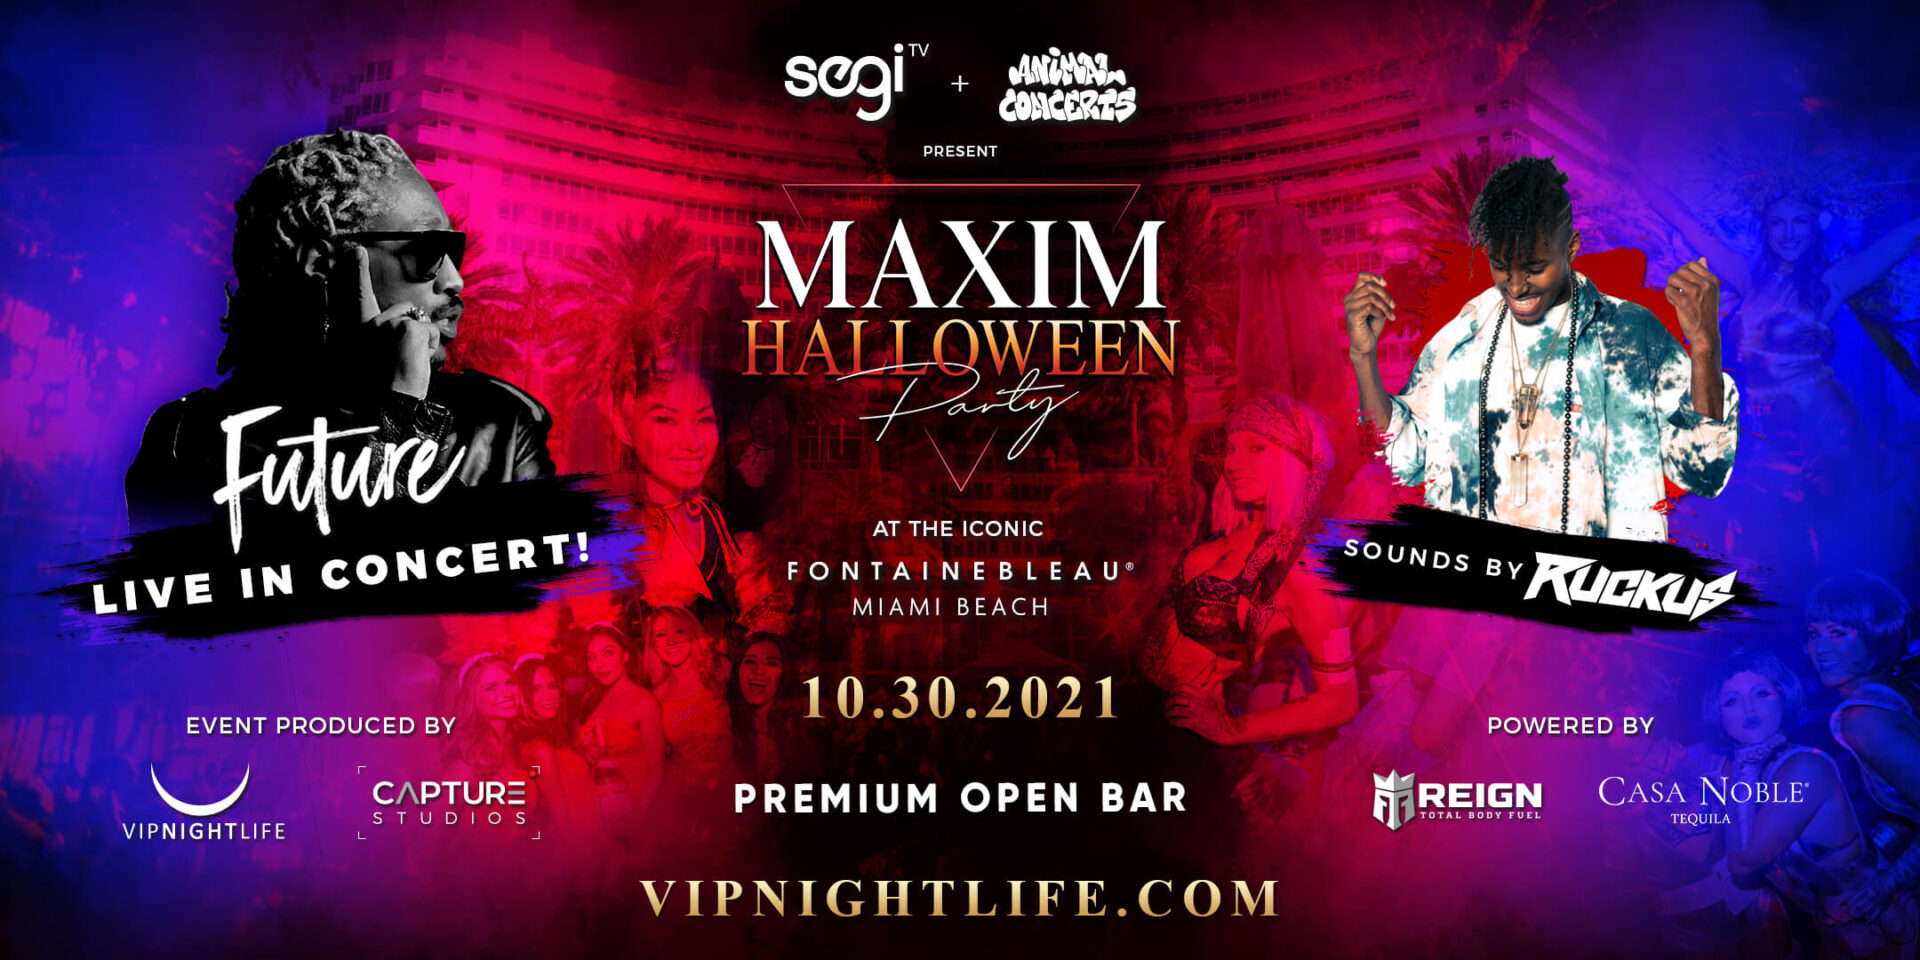 Maxim Halloween Party Miami with FUTURE Live in Concert & DJ Ruckus